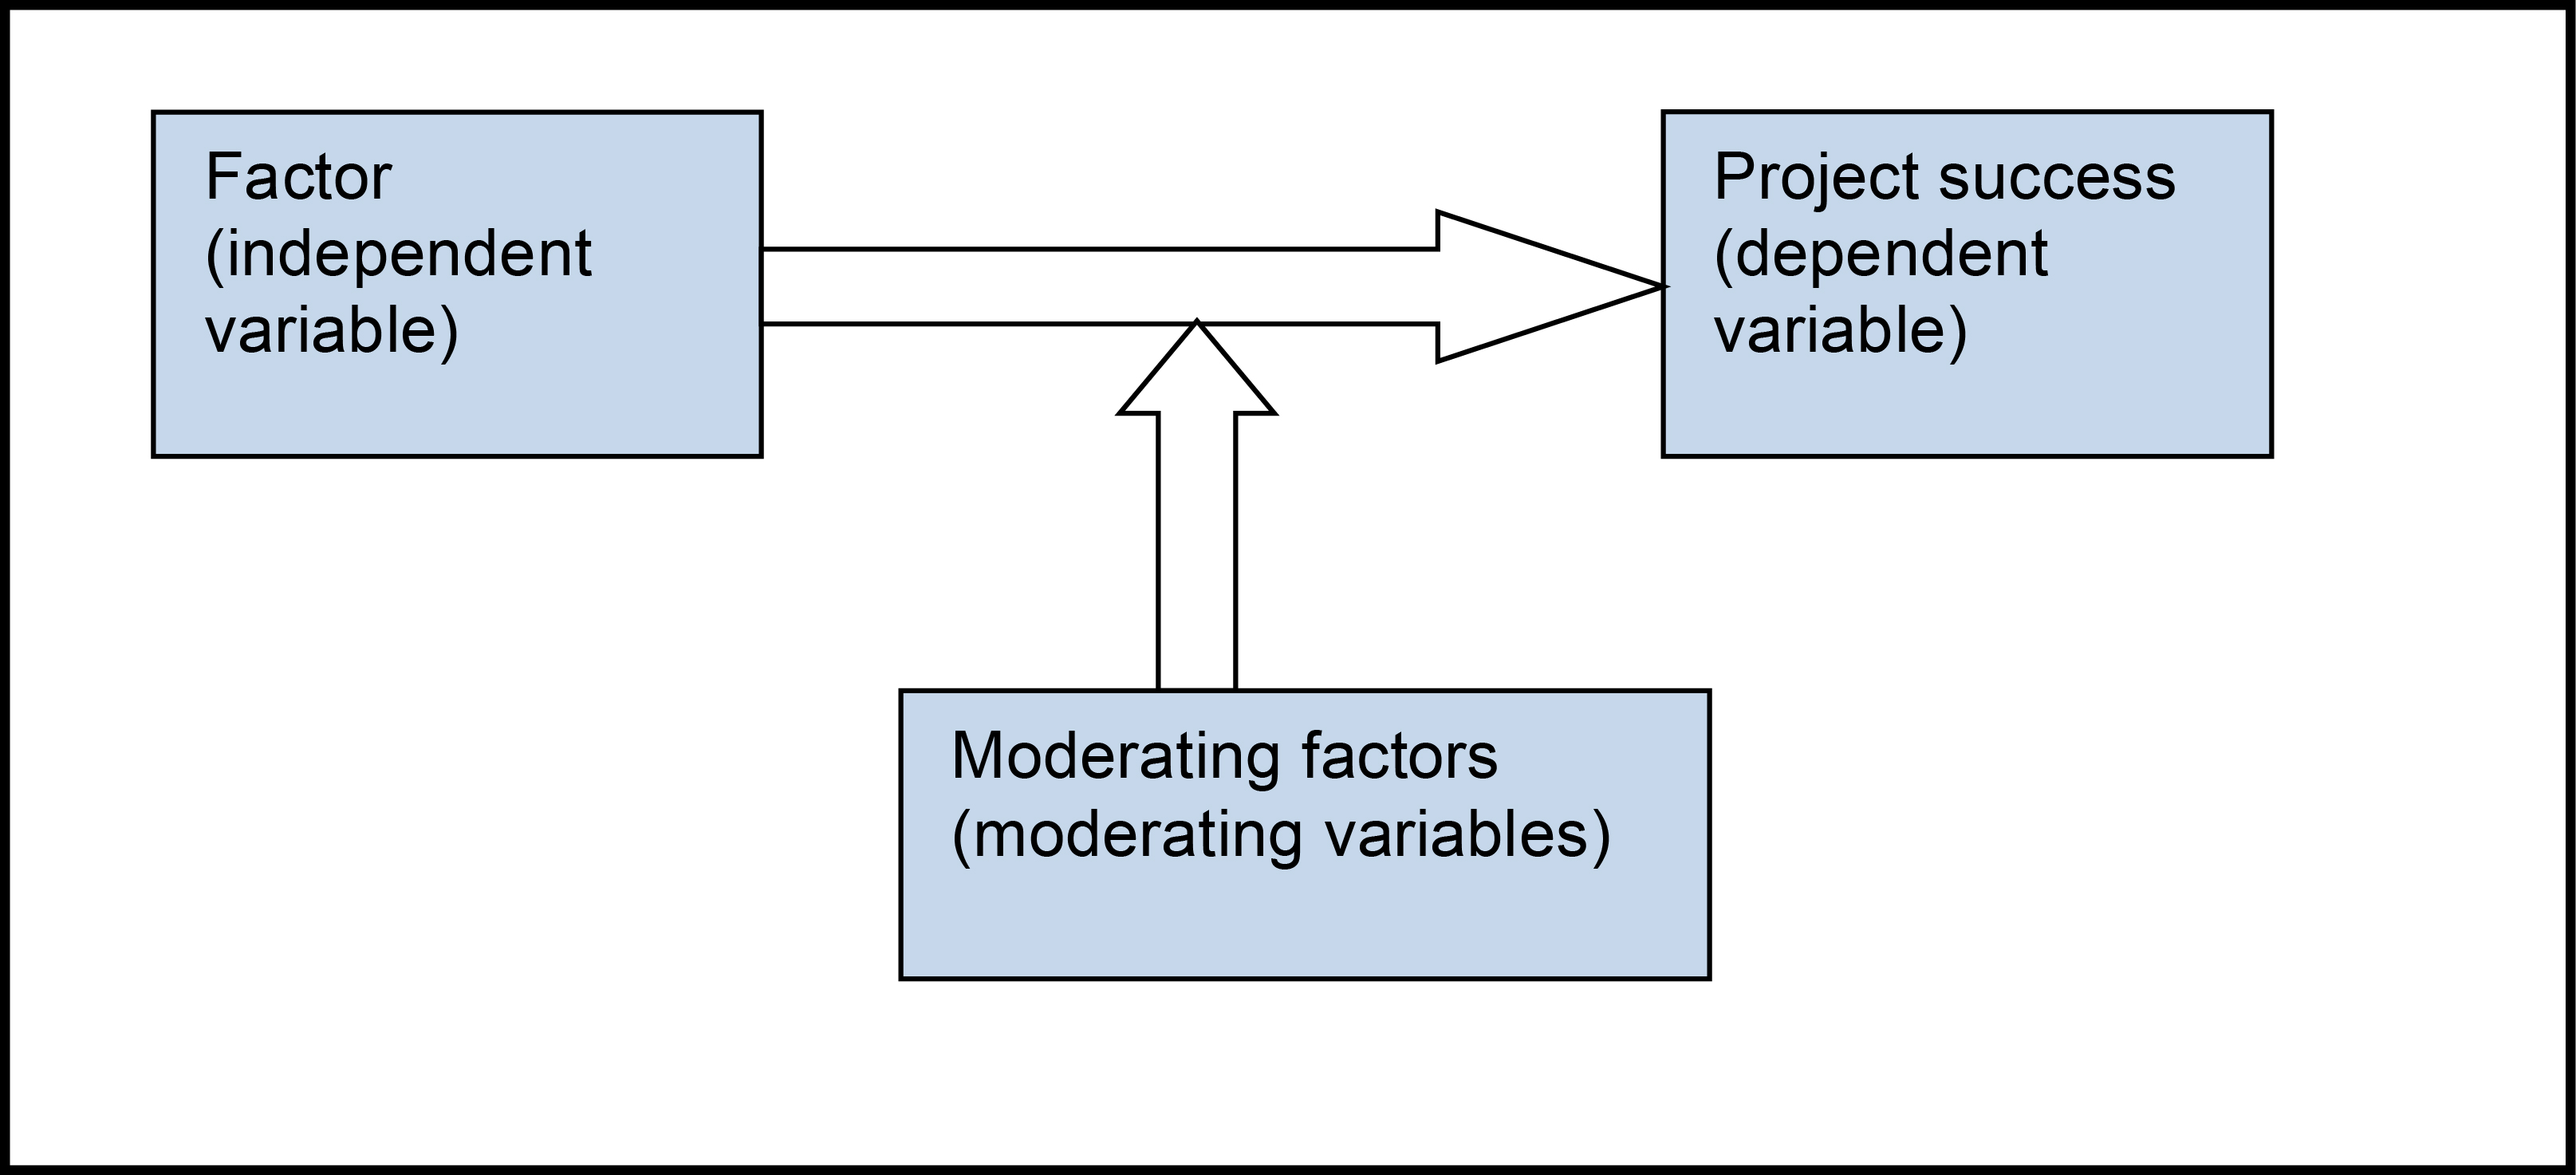 Figure 1: Research model for the influence of an individual factor on project success (or failure)